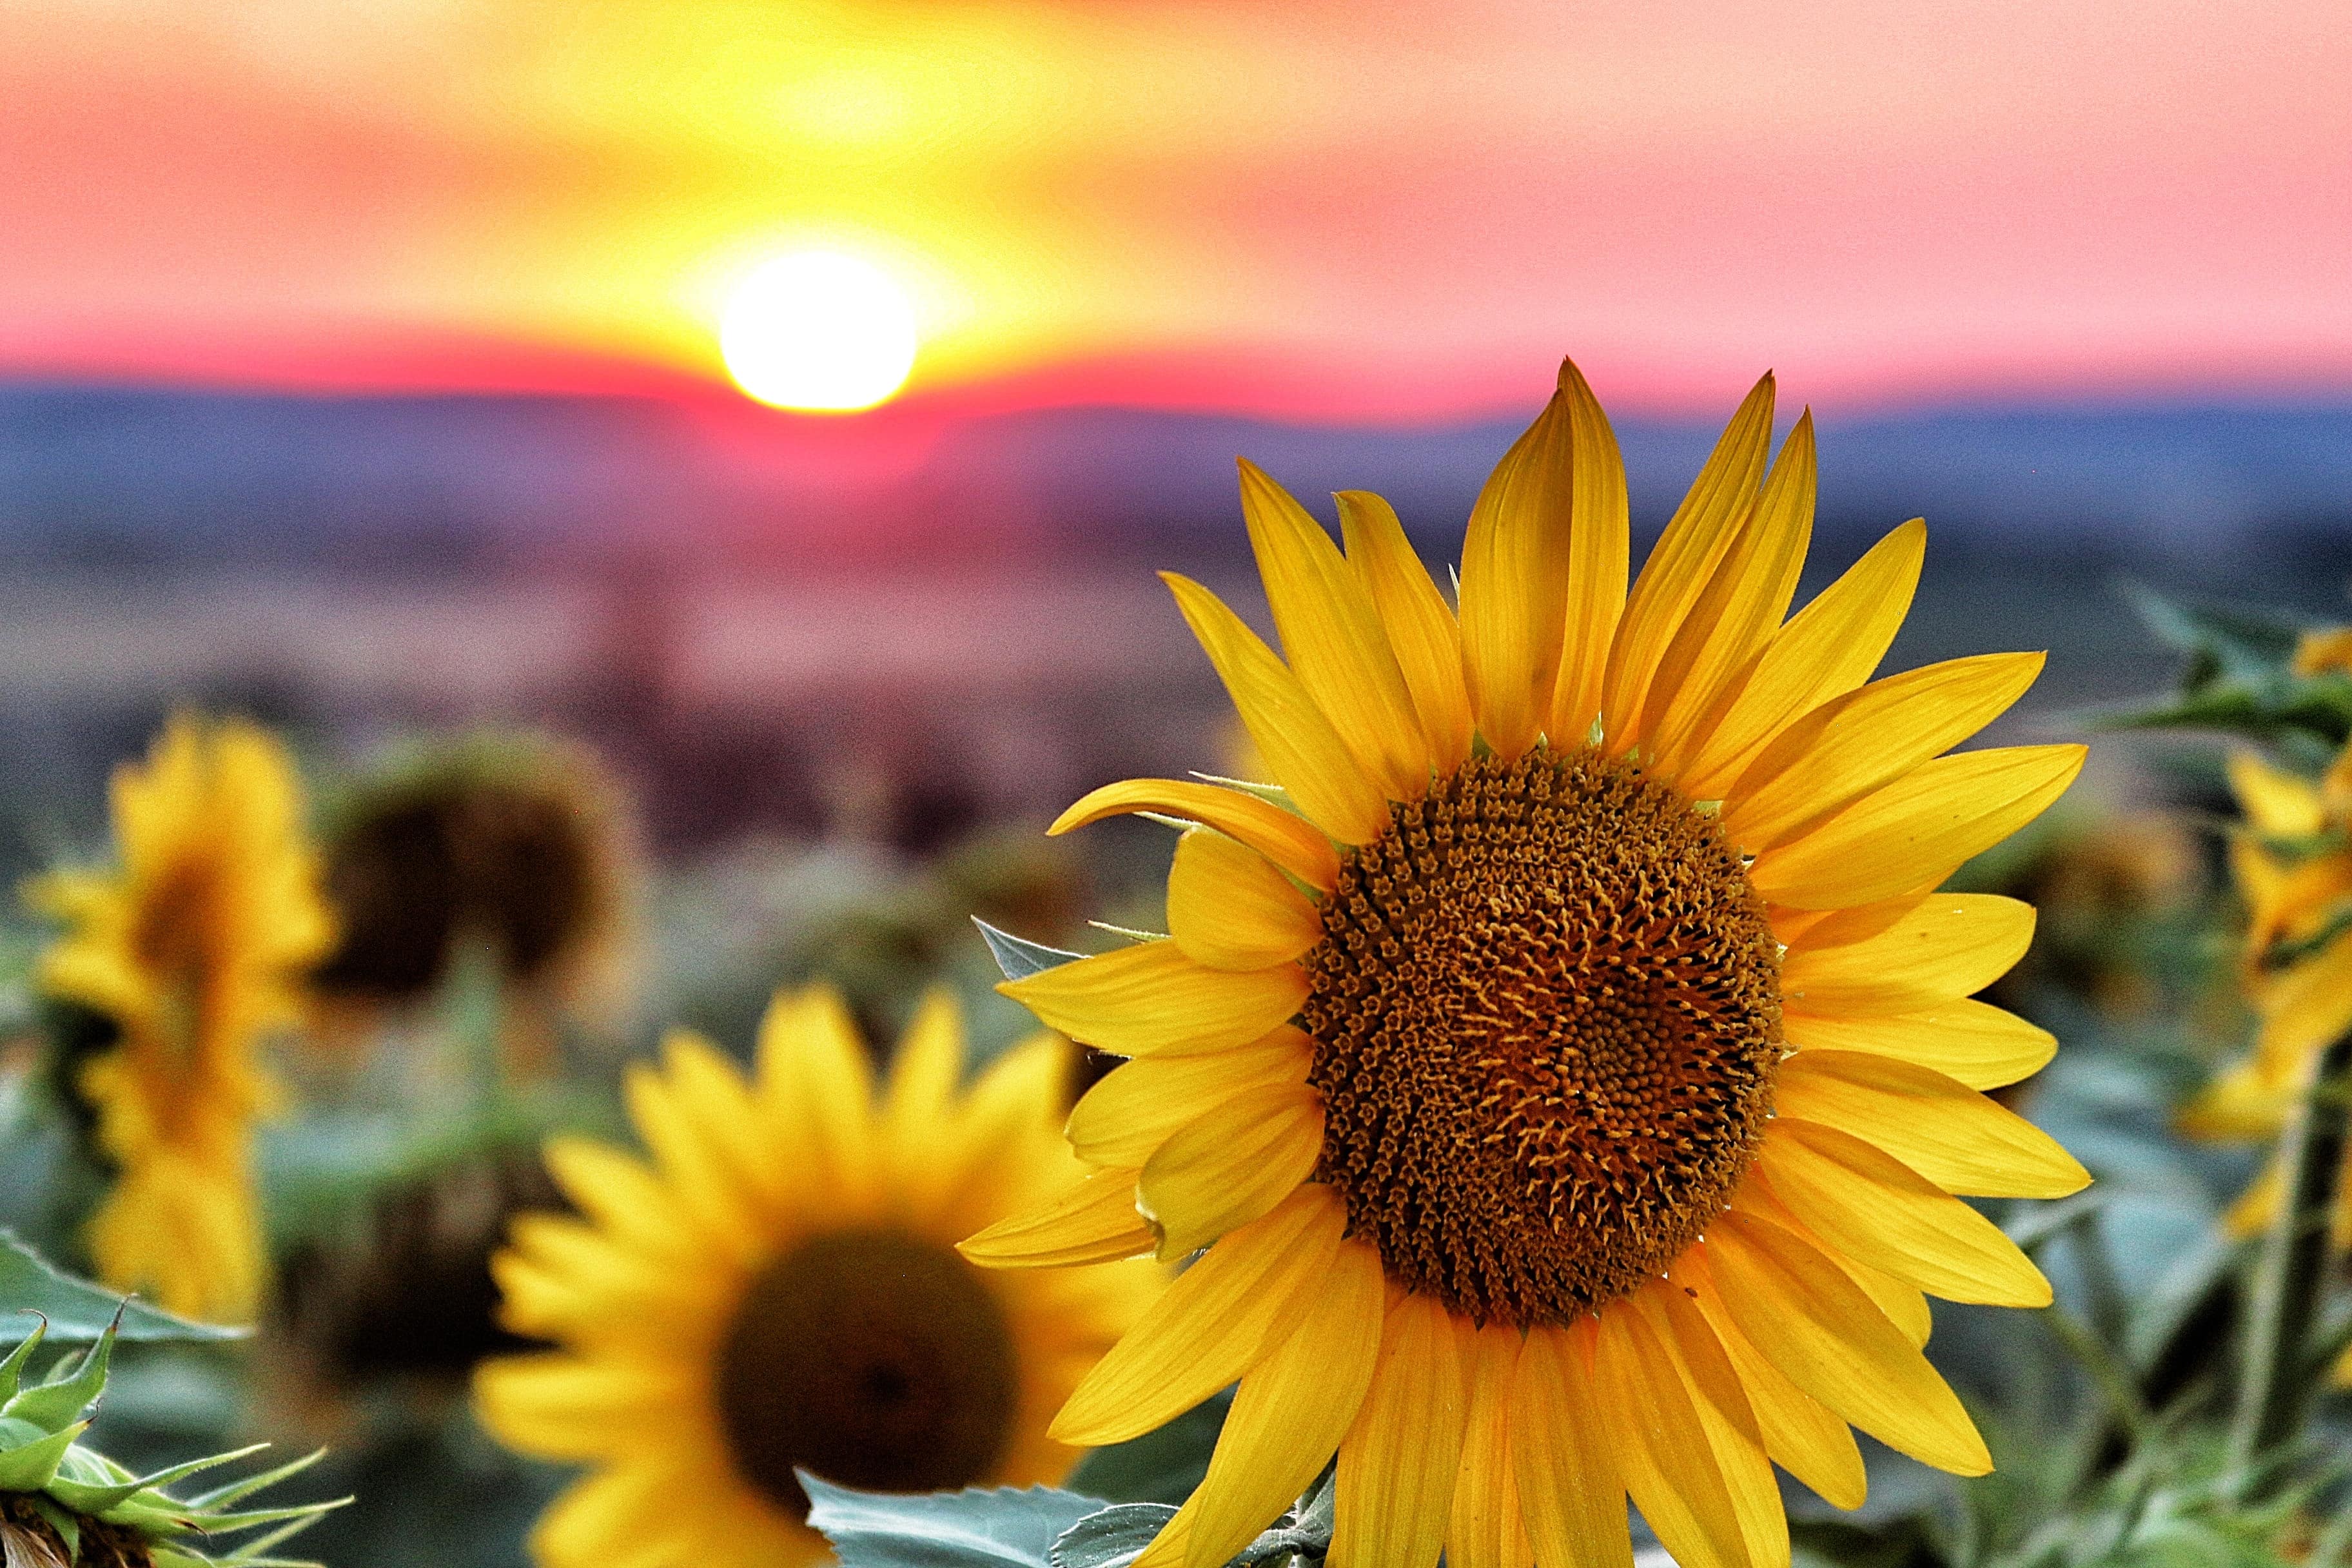 Stock image - Sunflower field at sunset in Vichy, France - Photo by Chastagner Thierry